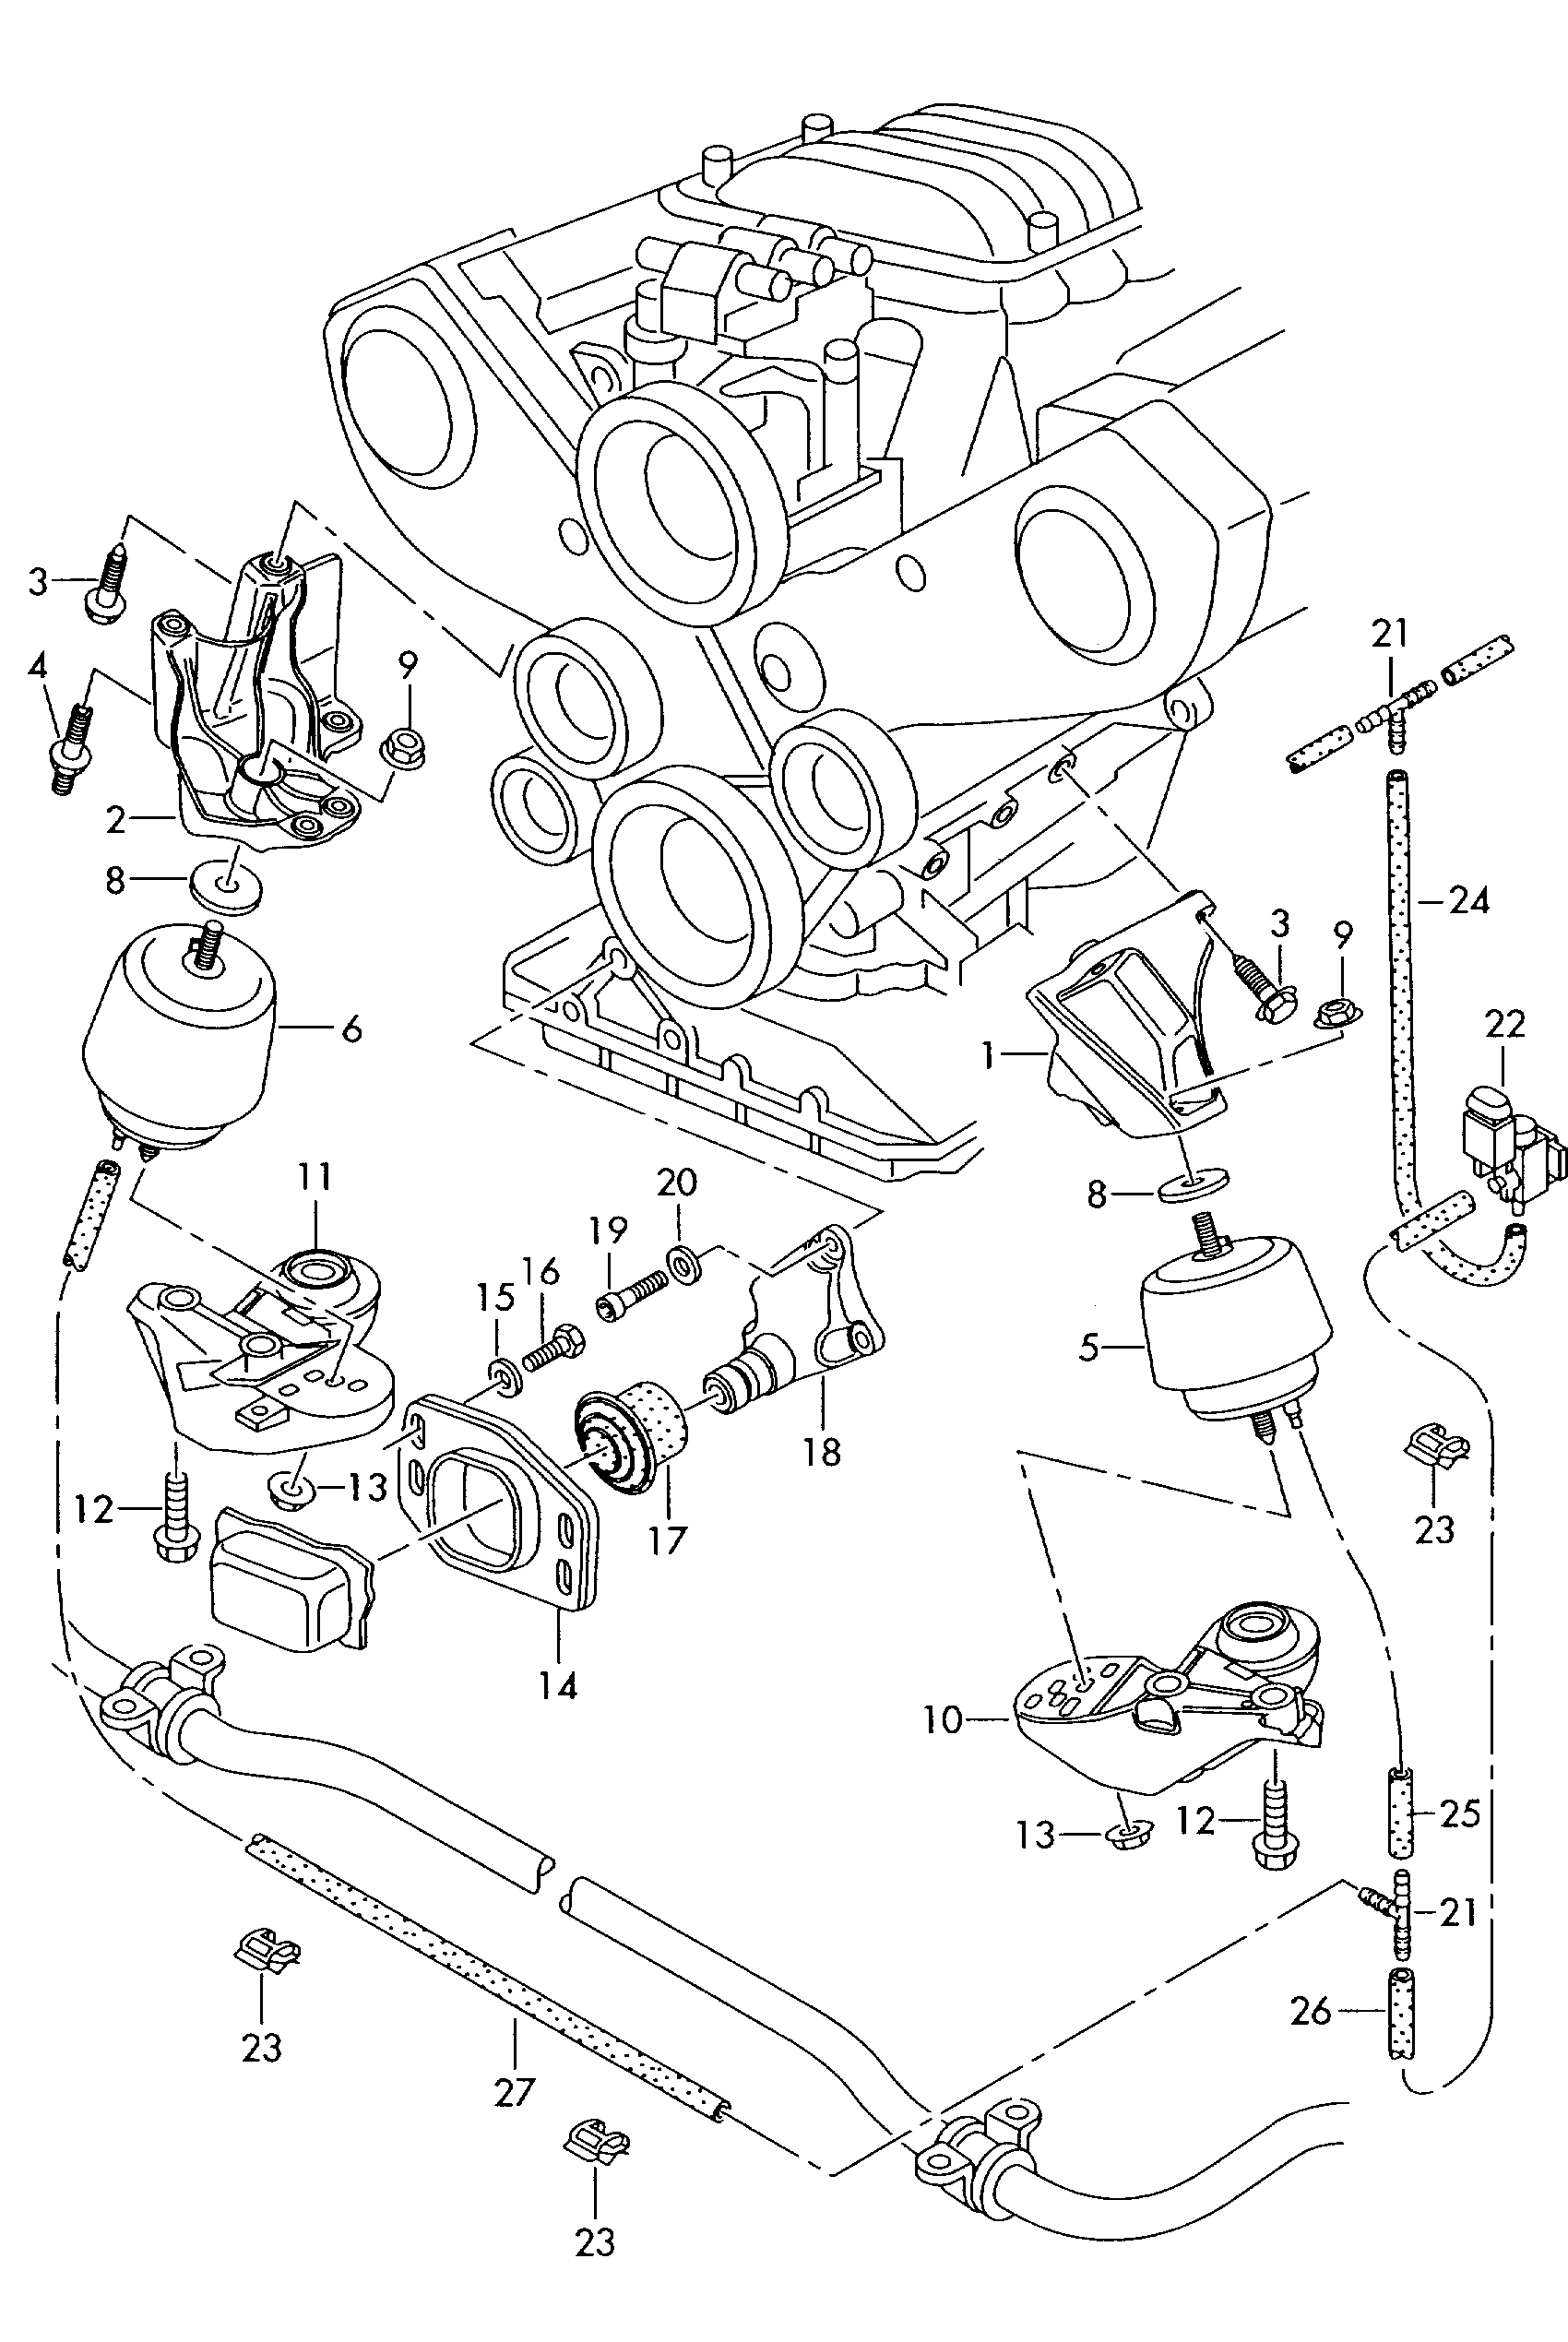 mounting parts for engine and<br>transmission 4.0 ltr. - Passat - pa